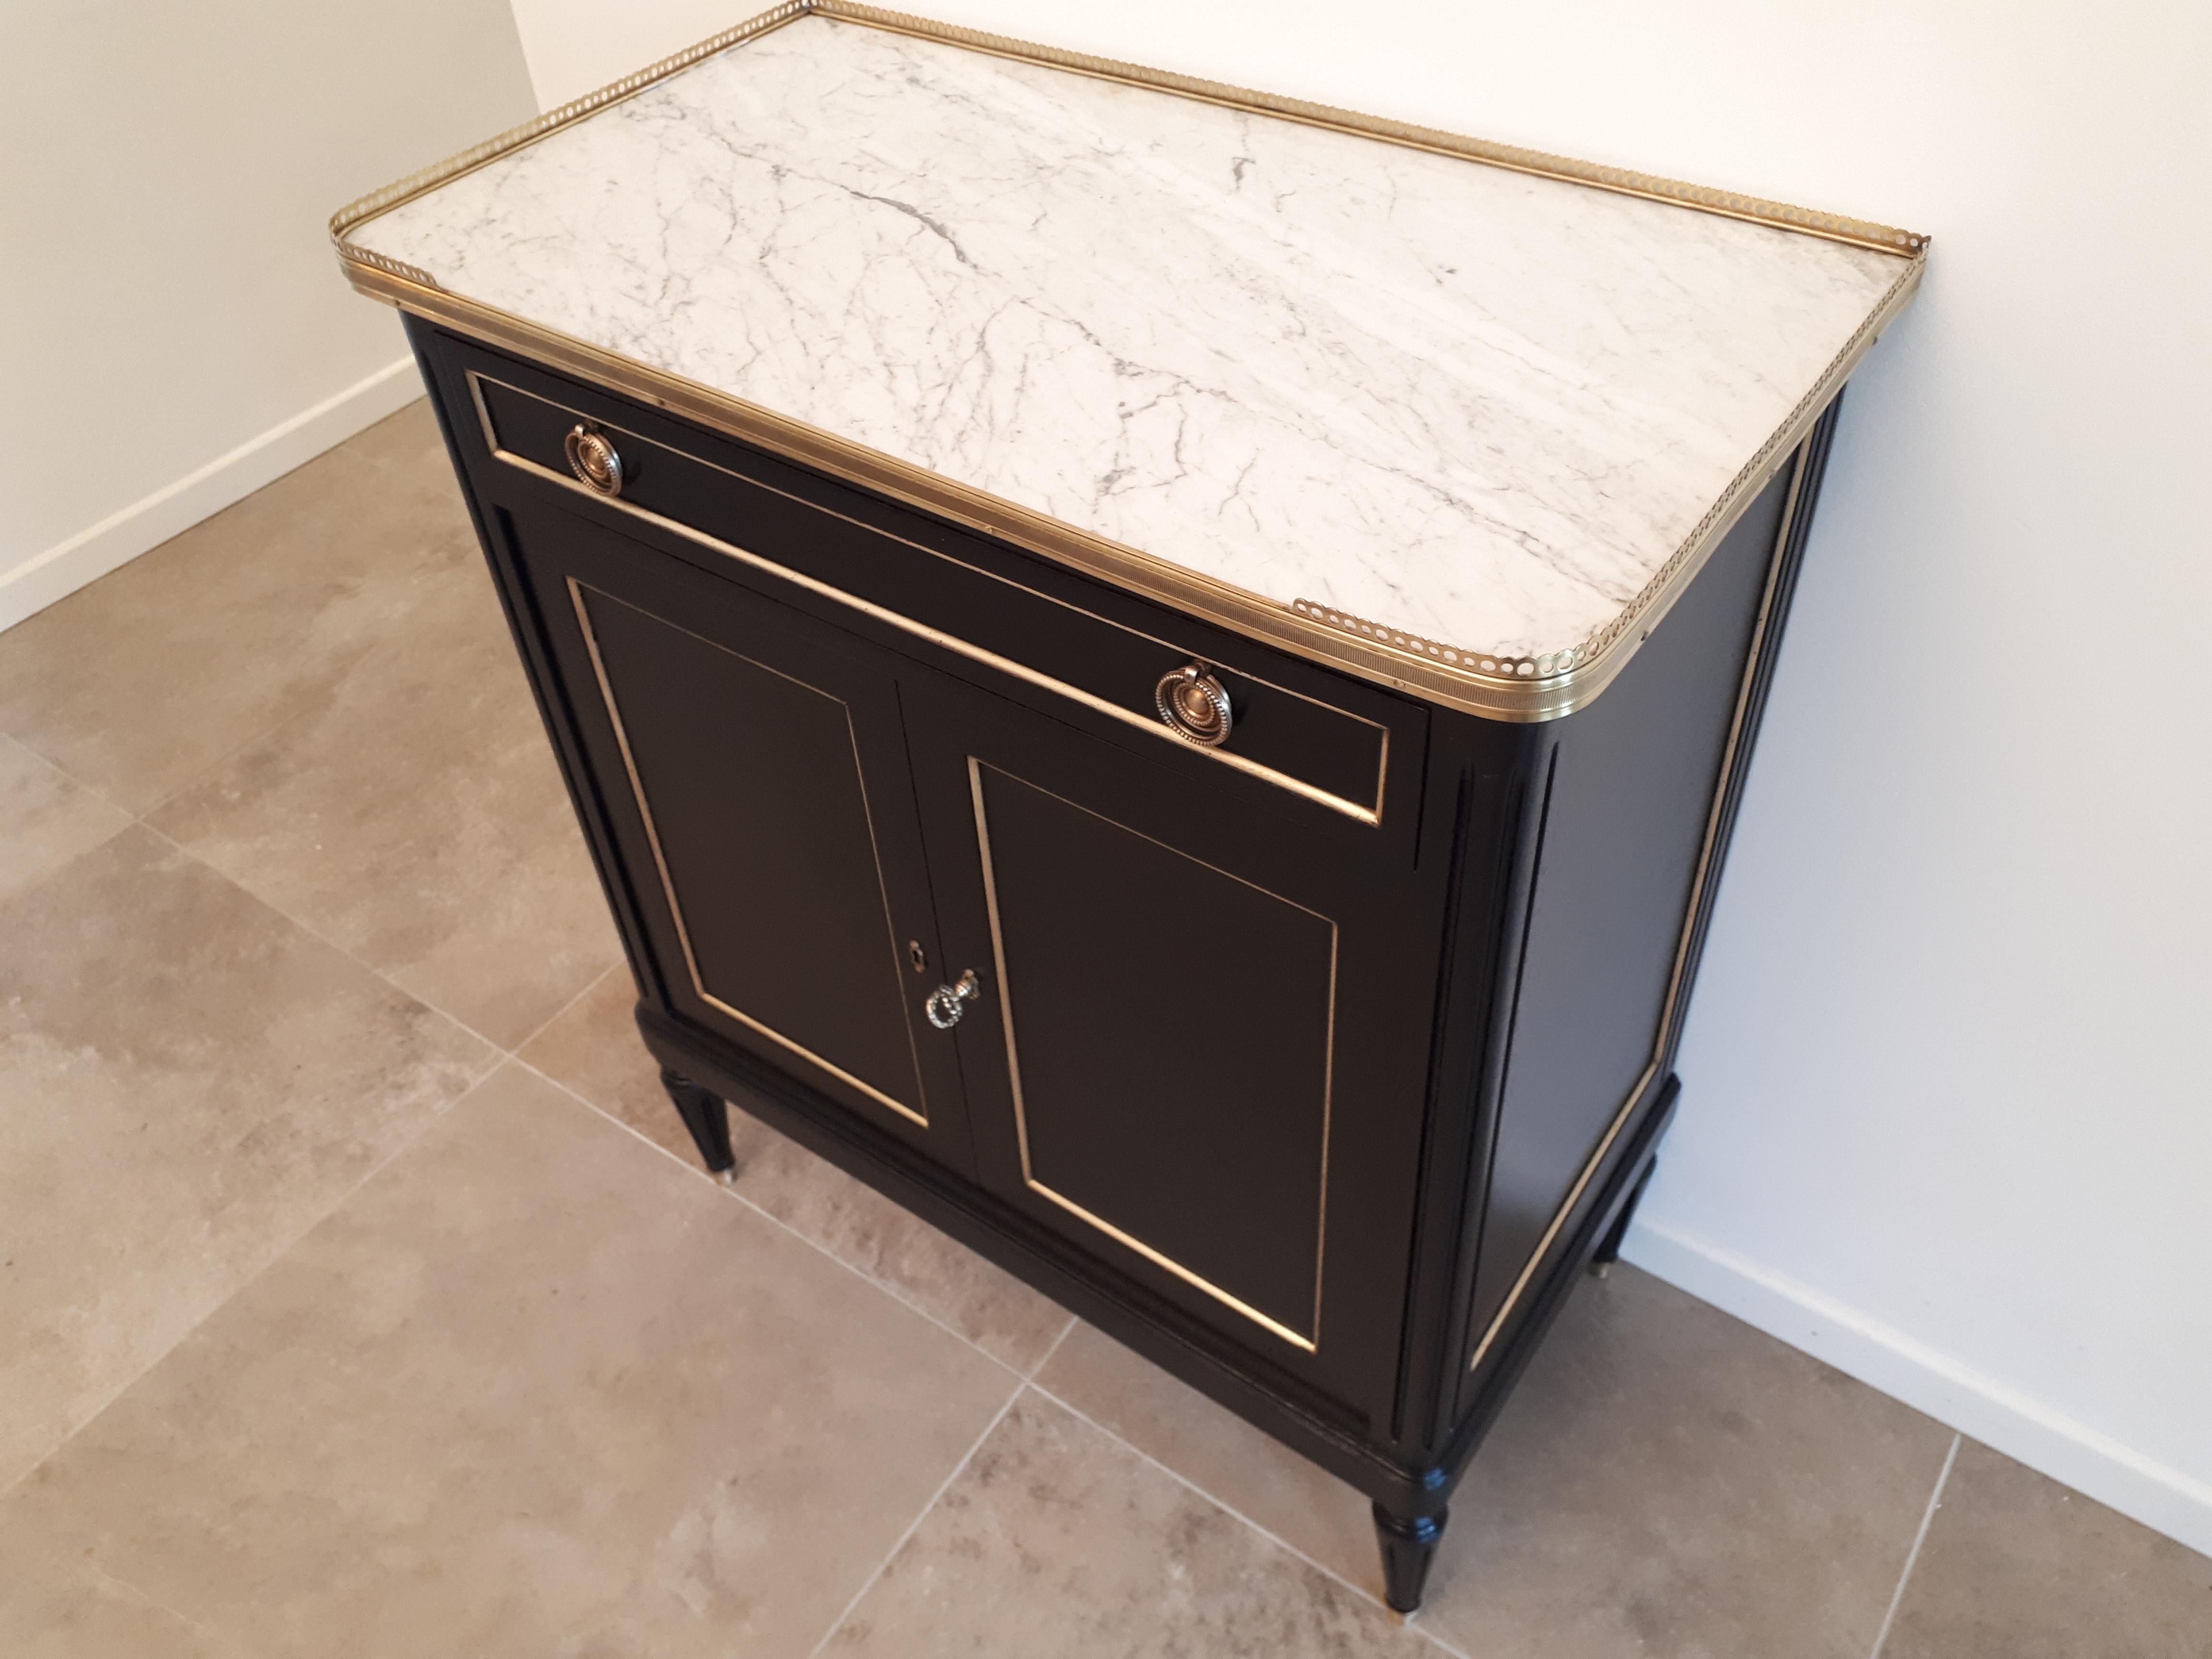 Antique French Louis XVI style bar buffet and topped with a white Carrara marble, fluted legs finished with golden bronze clogs.
One drawer, two doors and the key.
Perfect to create a small whiskey bar in the living room.